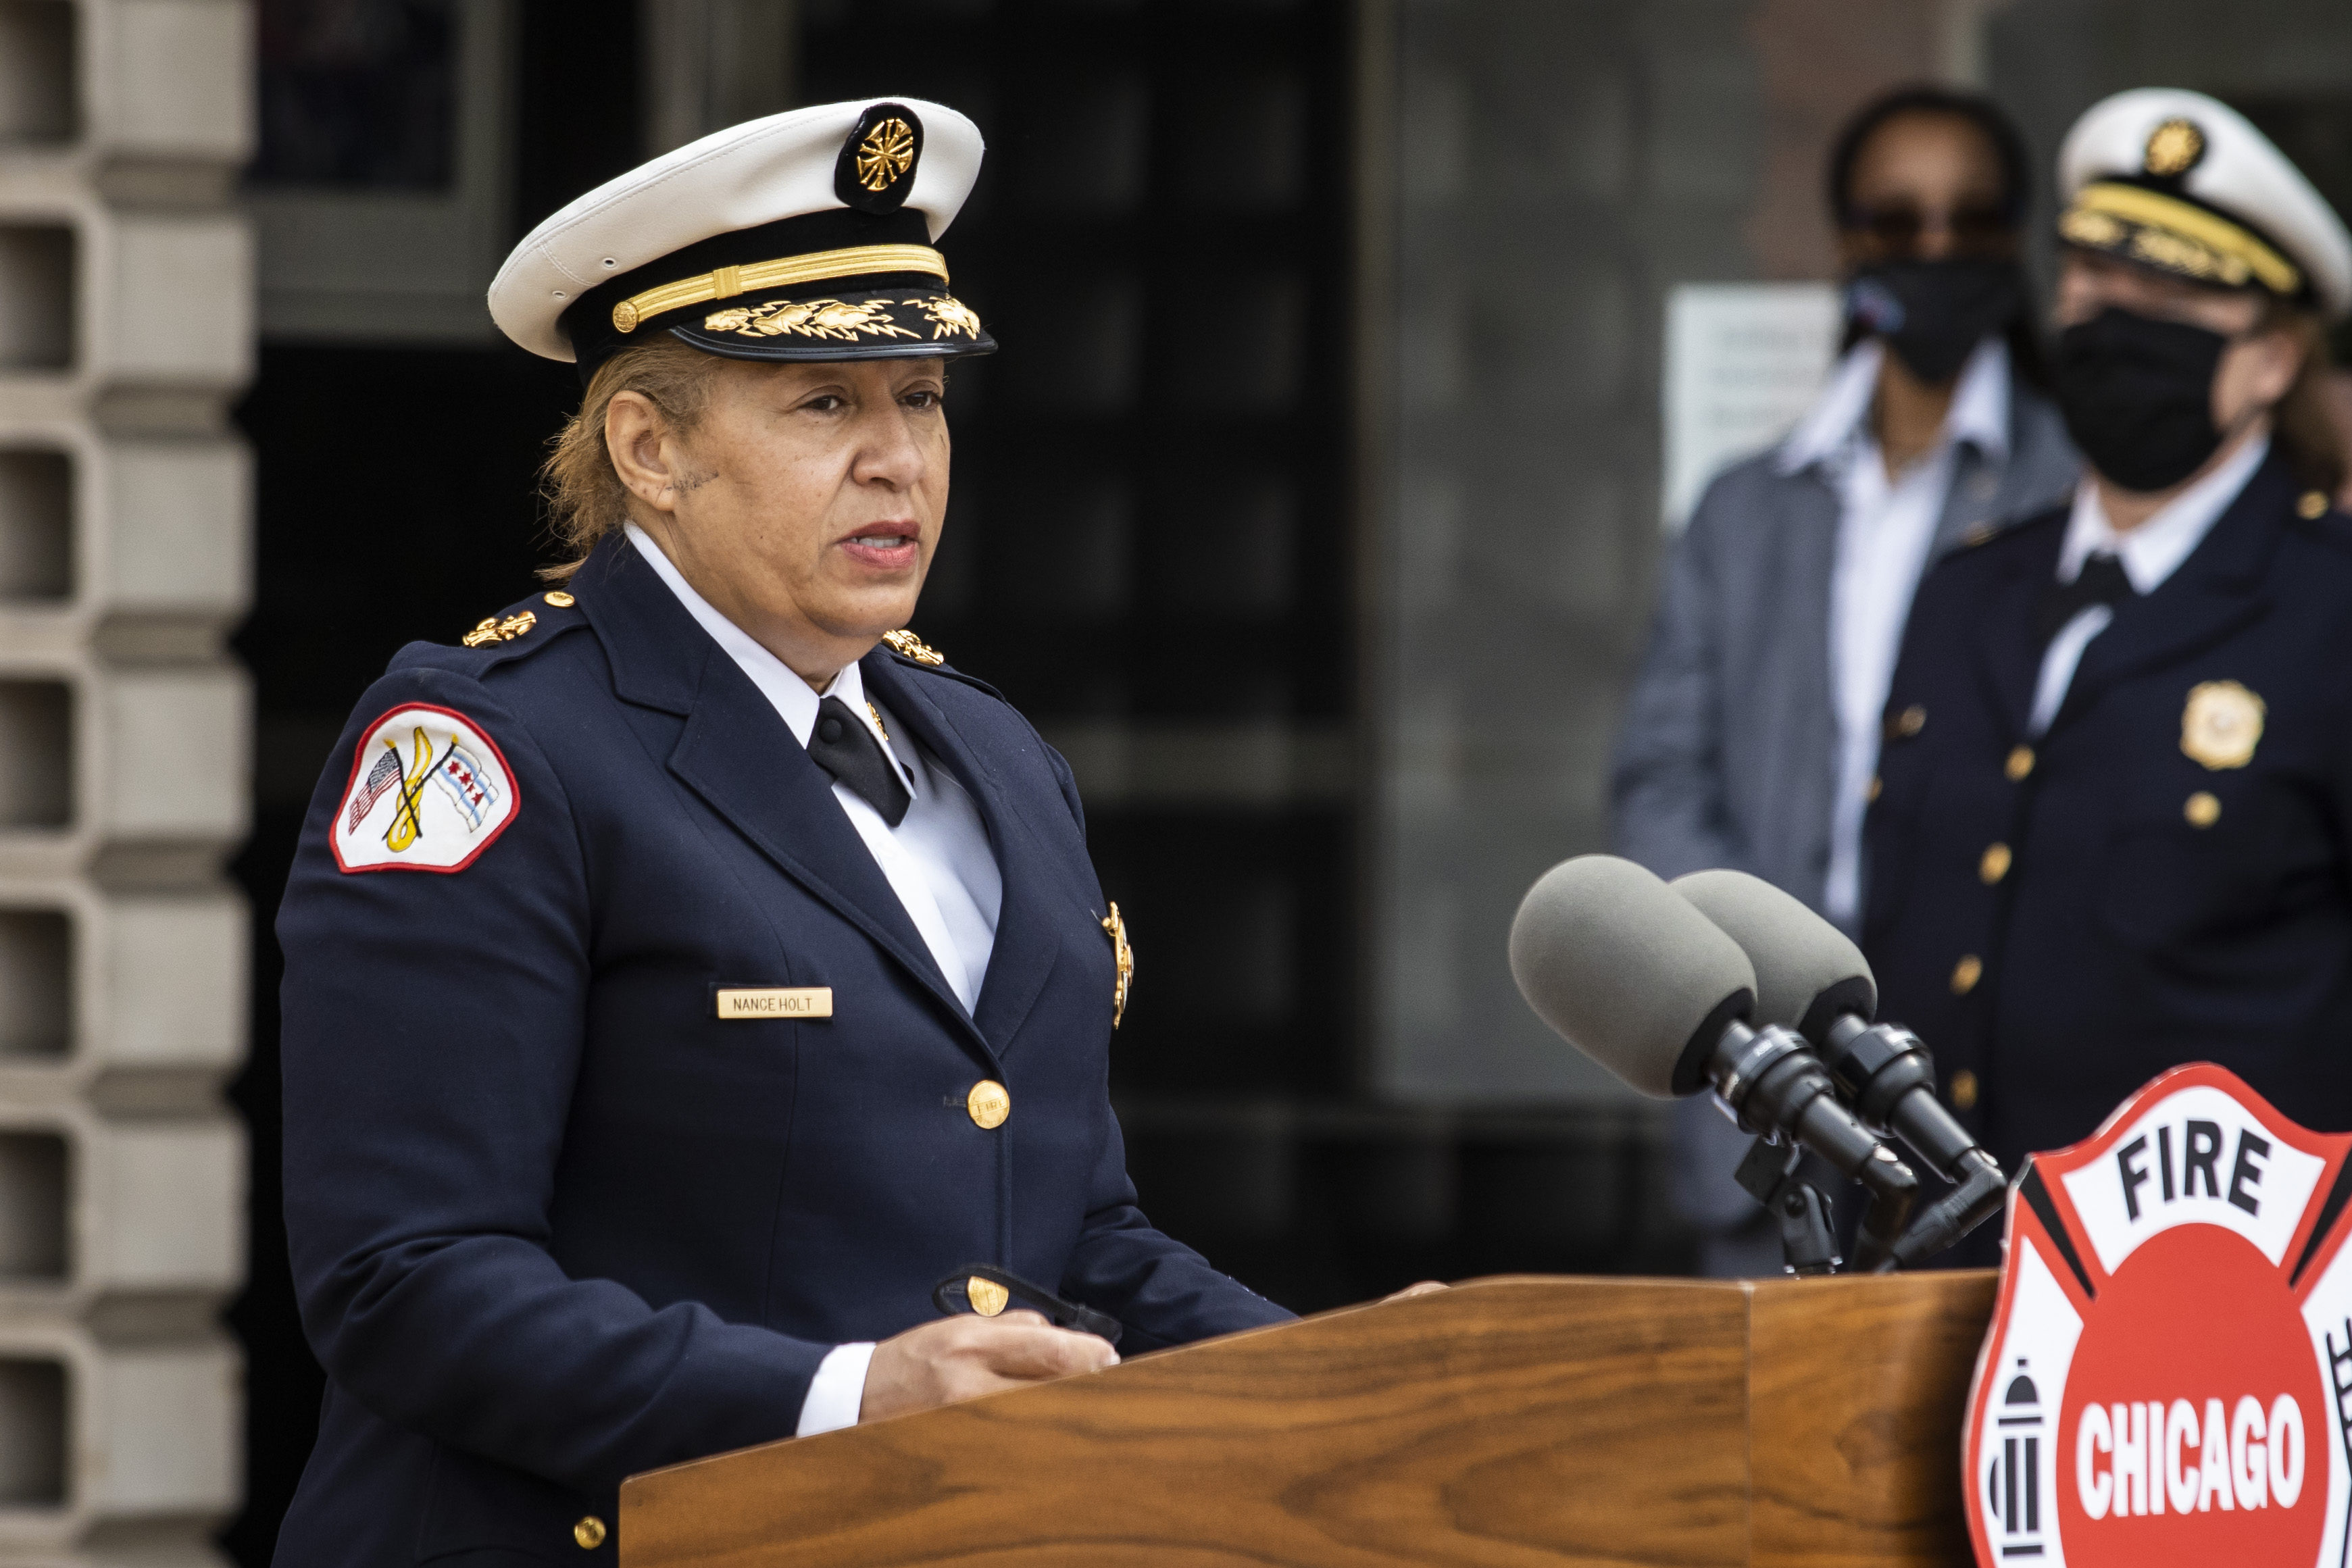 Acting Chicago Fire Department Commissioner Annette Nance-Holt speaks during a badge ceremony for paramedic Robert Truevillian at the Robert J. Quinn Fire Academy in the South Loop, Tuesday morning, May 18, 2021. Truevillian, 55, was the third active member of CFD to die of complications from COVID-19 in December 2020. | Ashlee Rezin Garcia/Sun-Times